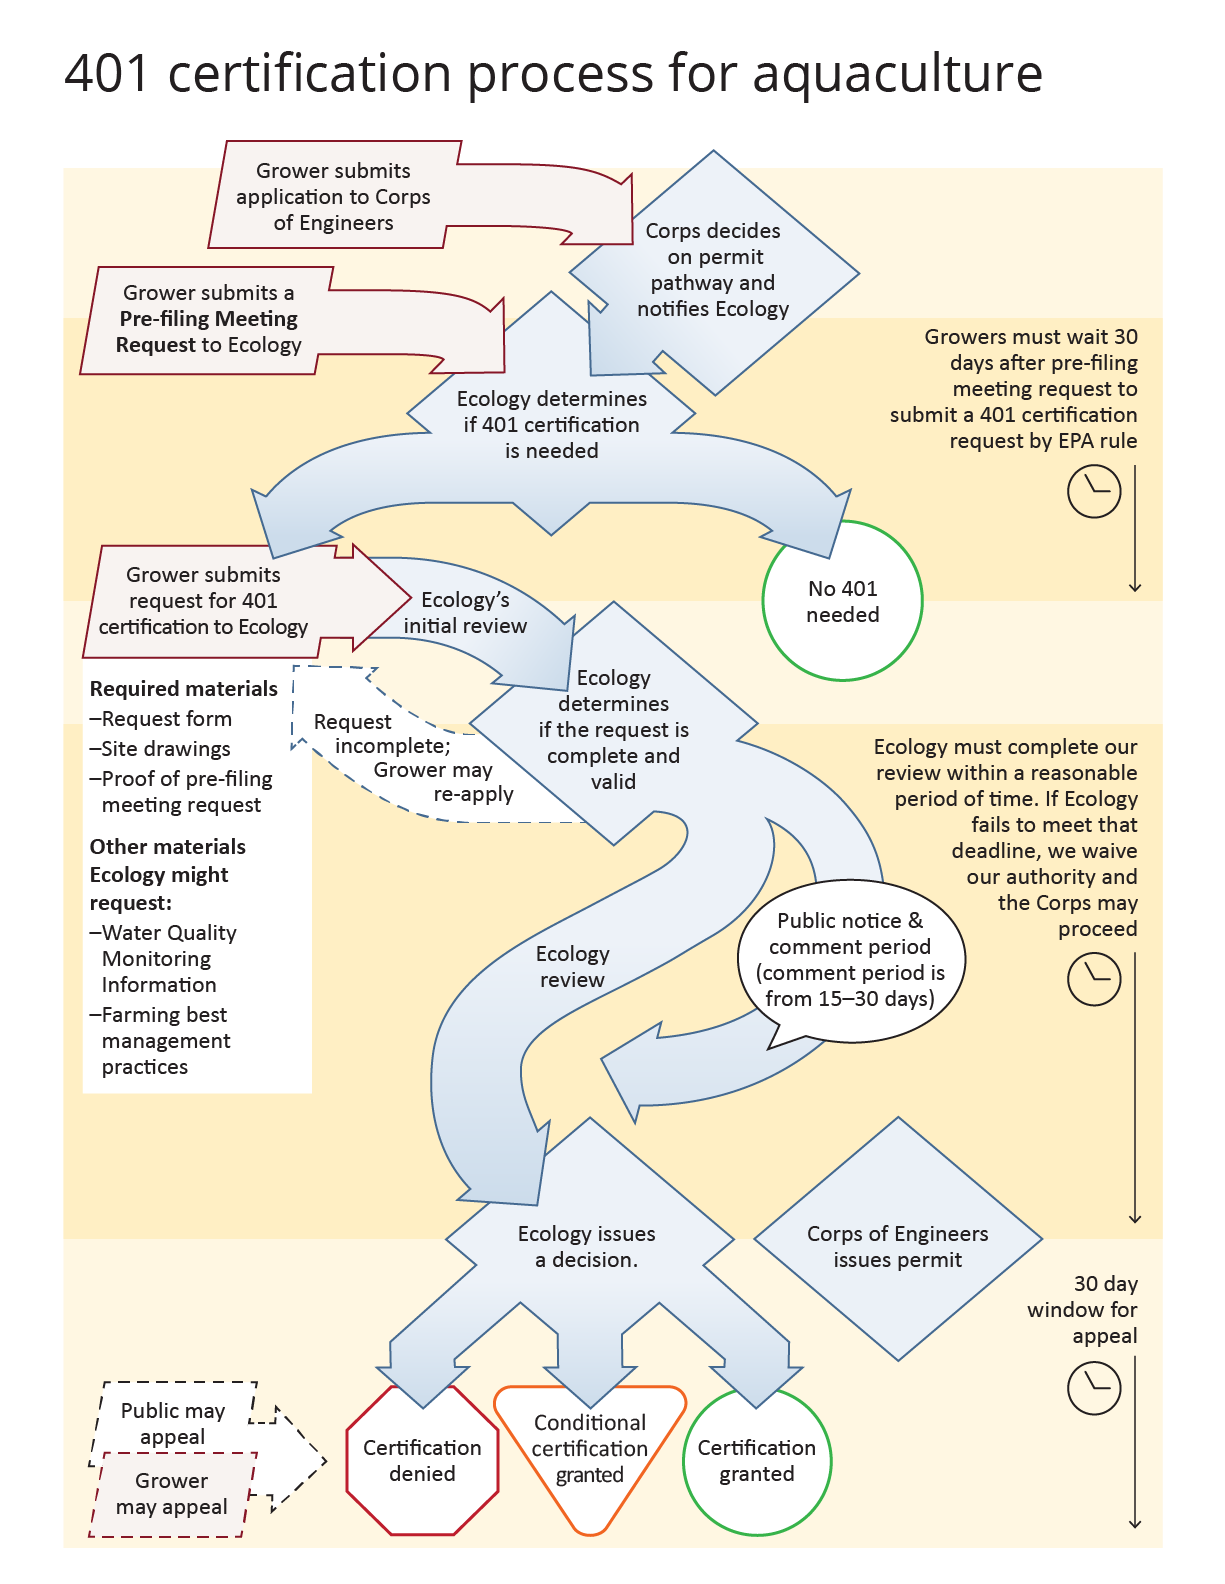 Infographic showing the 401 application process as described in the text of this page.